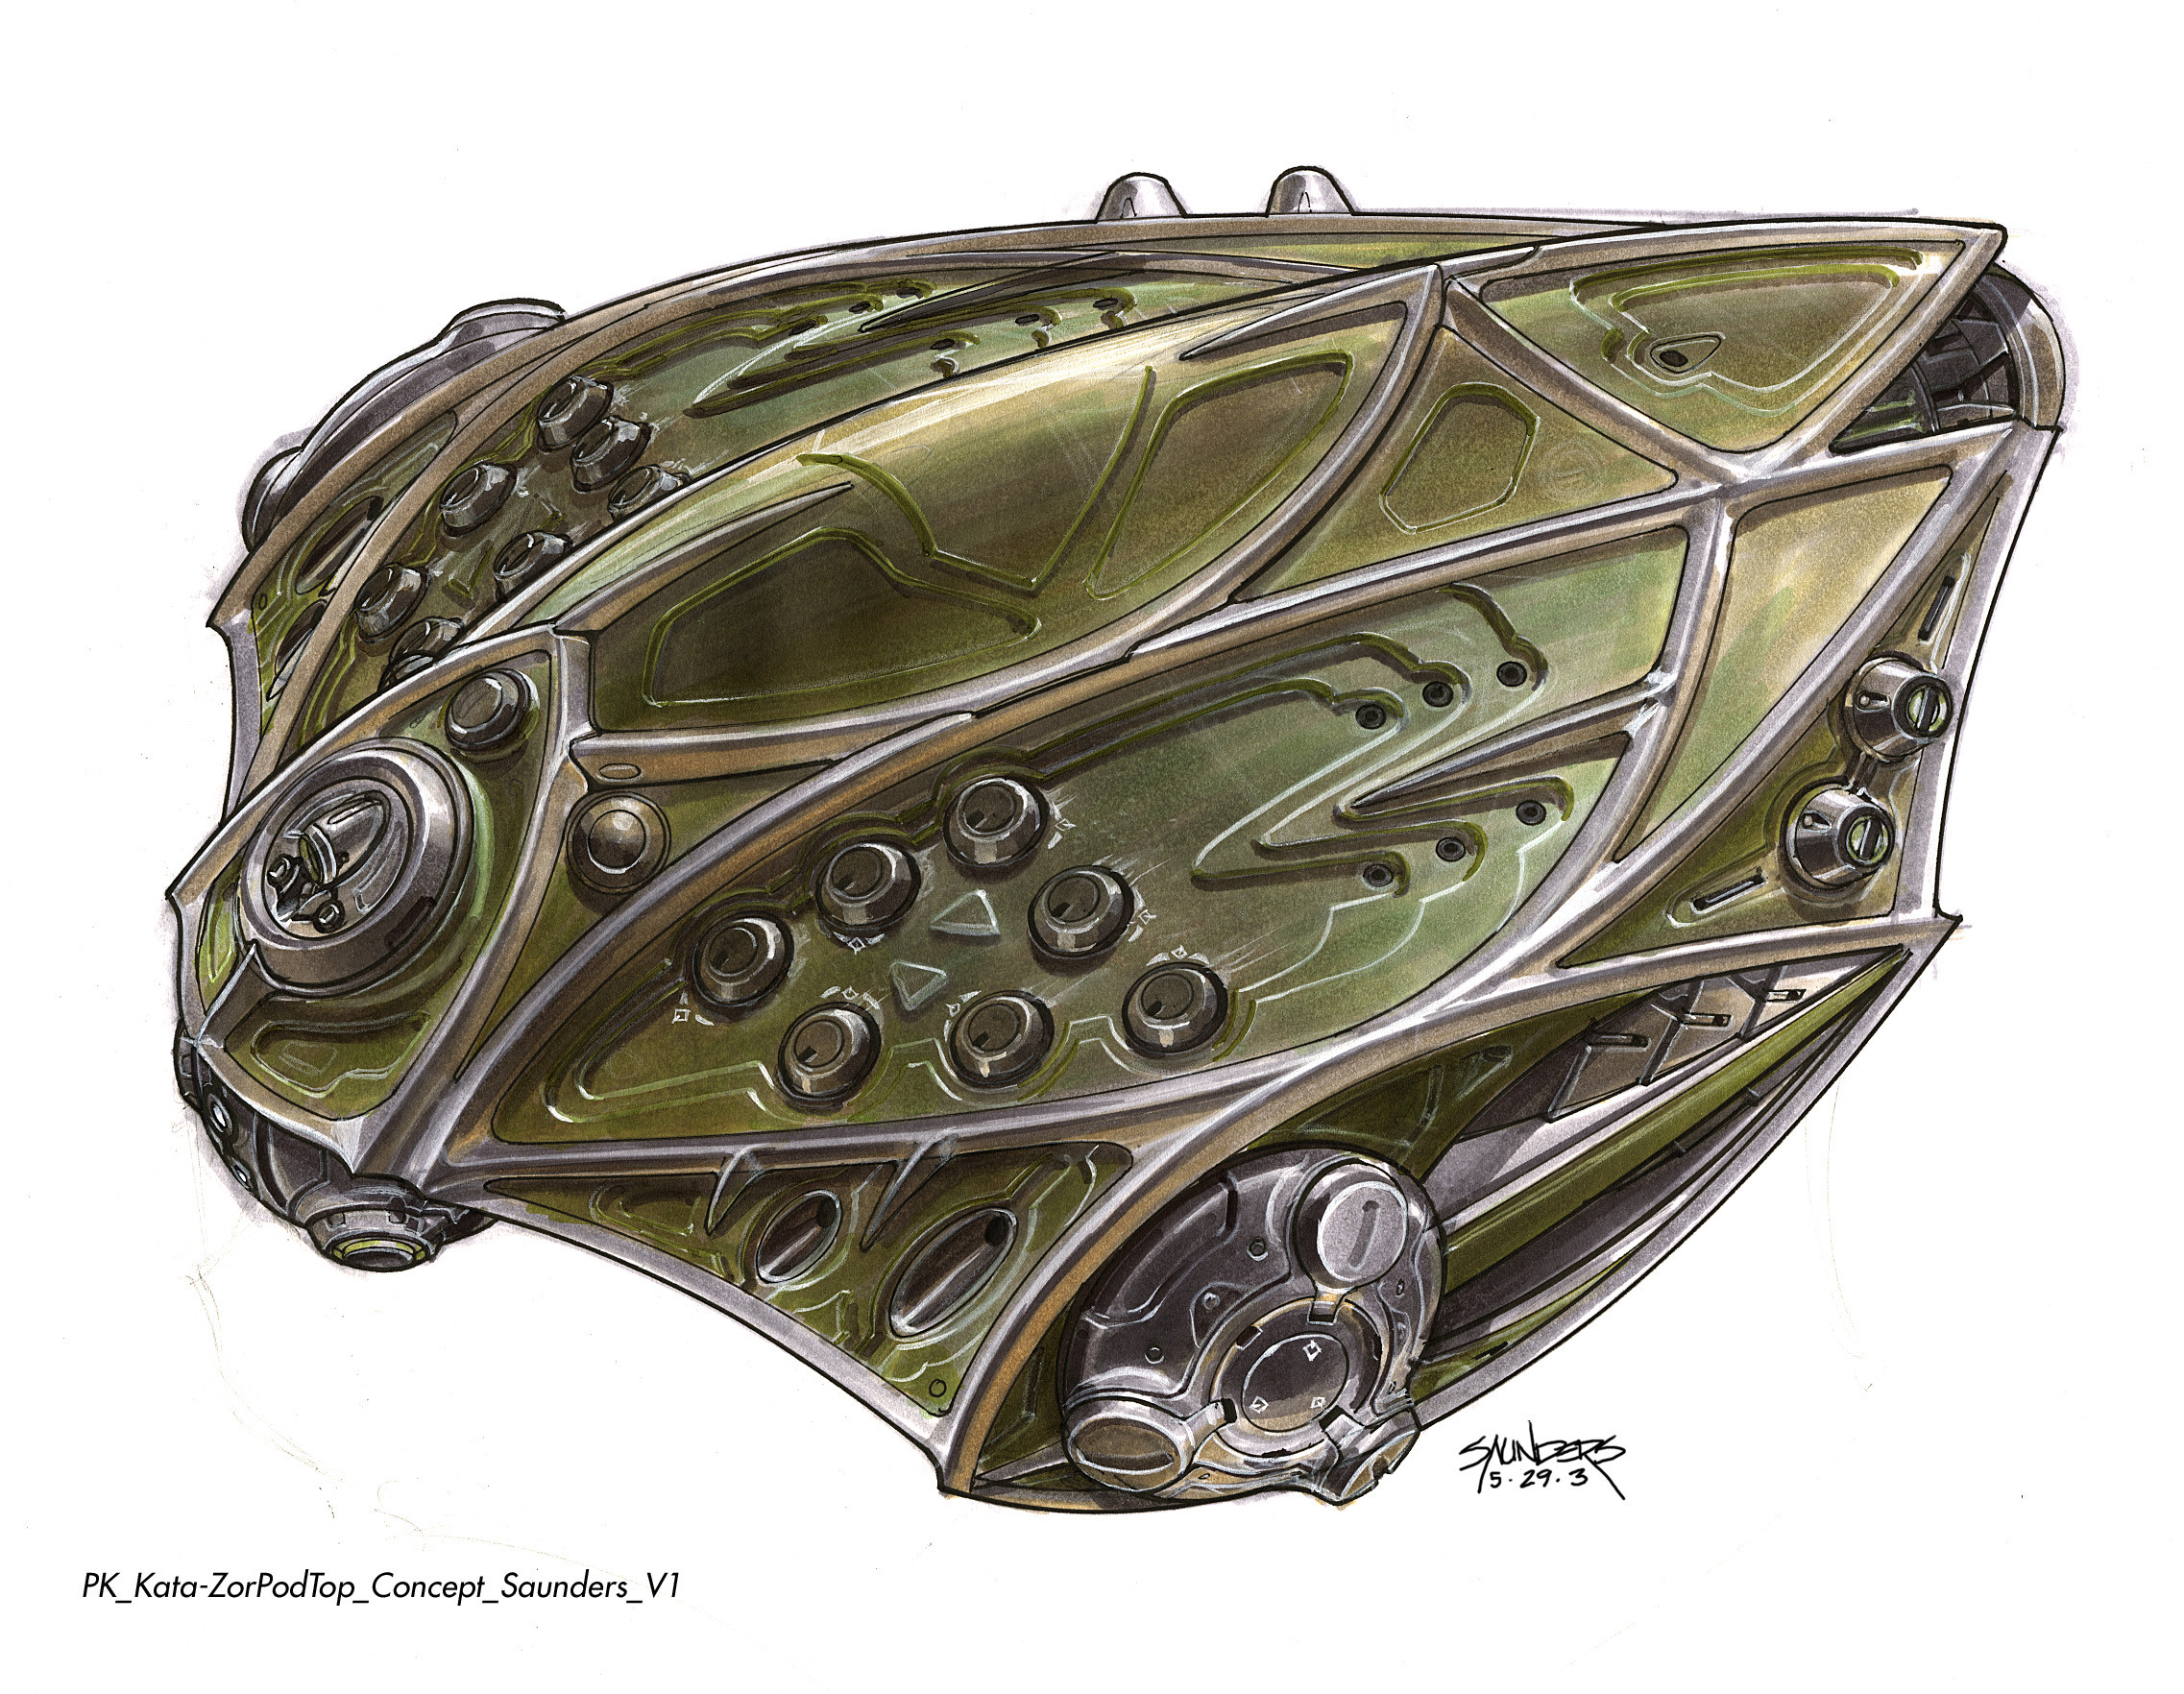 Final design of the Kata-Zor Pod. In contrast to Kal-El's more tear-drop shaped pod, these needed to look wicked and deadly. Fellow designer Geoff Darrow had established an almost  medieval look to Kryptonian architecture, so I took some cues from that.
